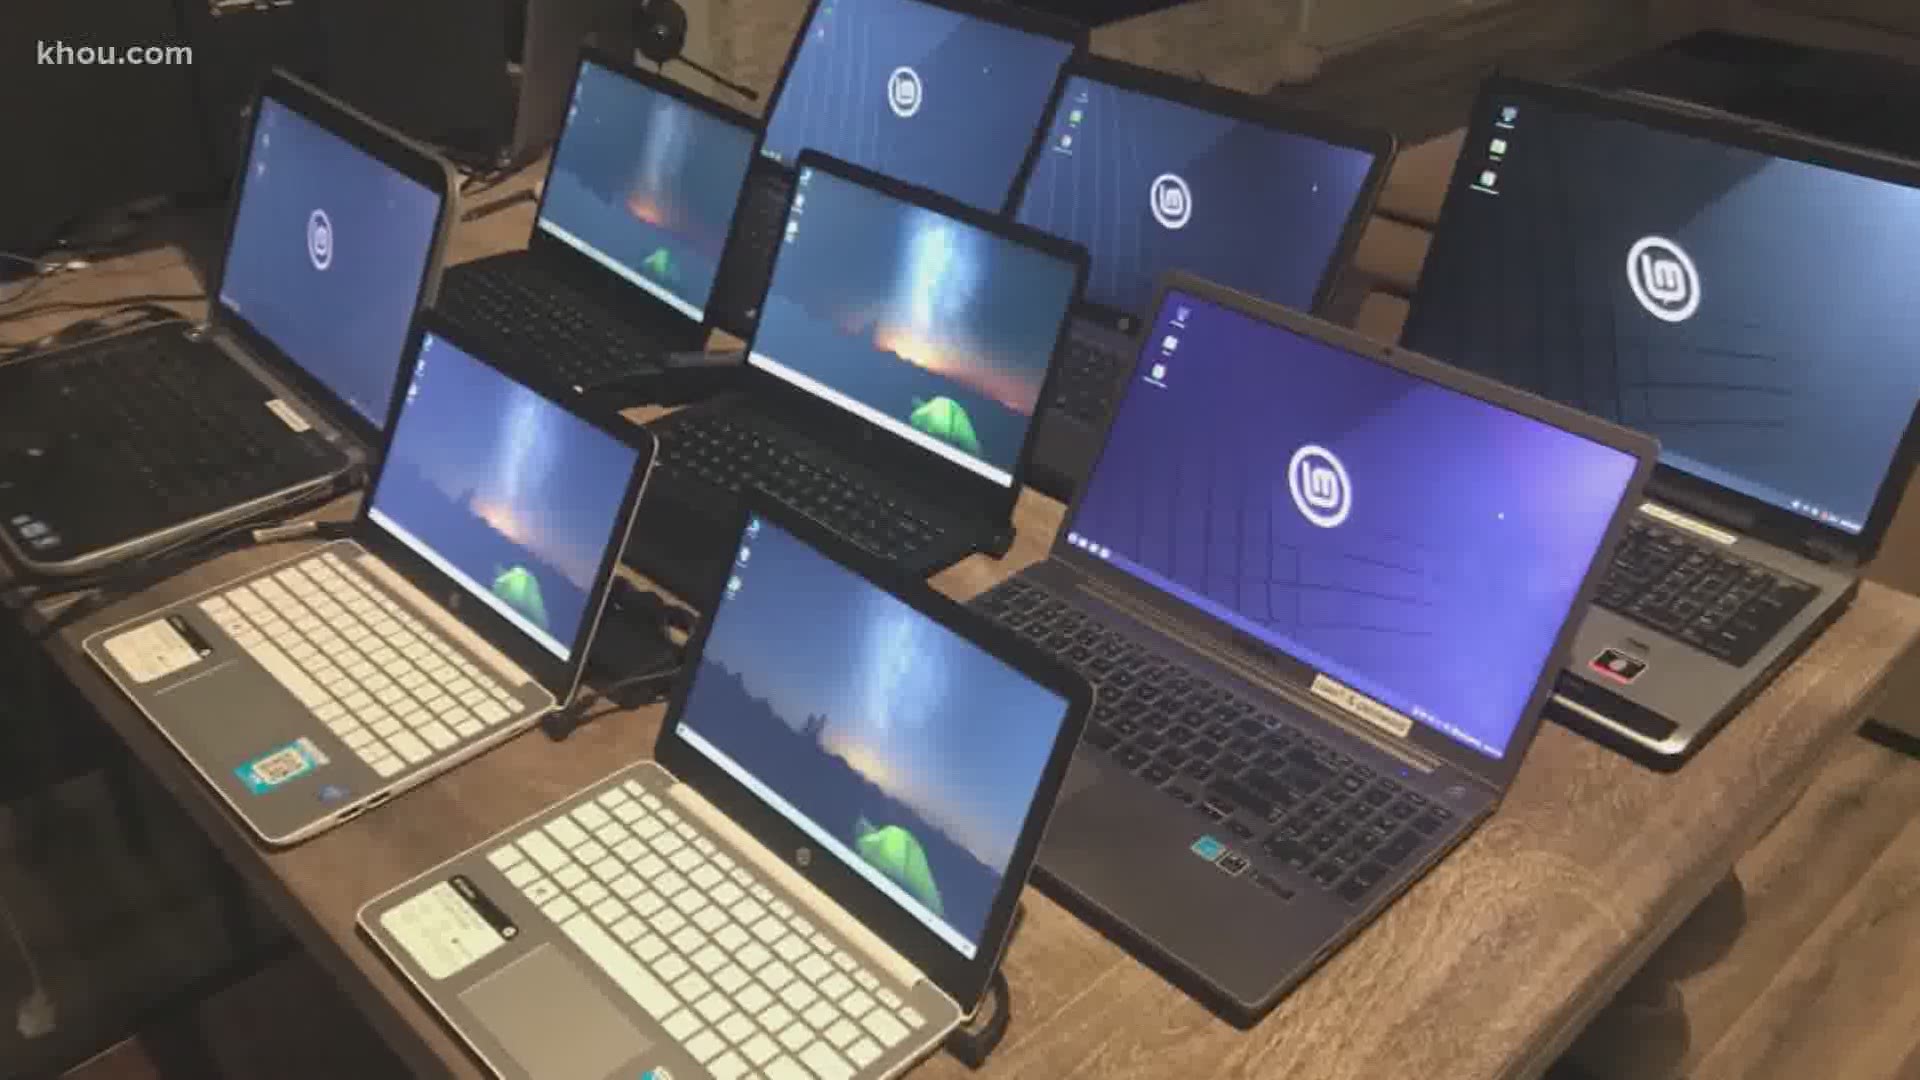 In Galveston ISD, a shipment of Chromebooks isn't expected to arrive until late August, but the virtual school year starts on Aug. 24.